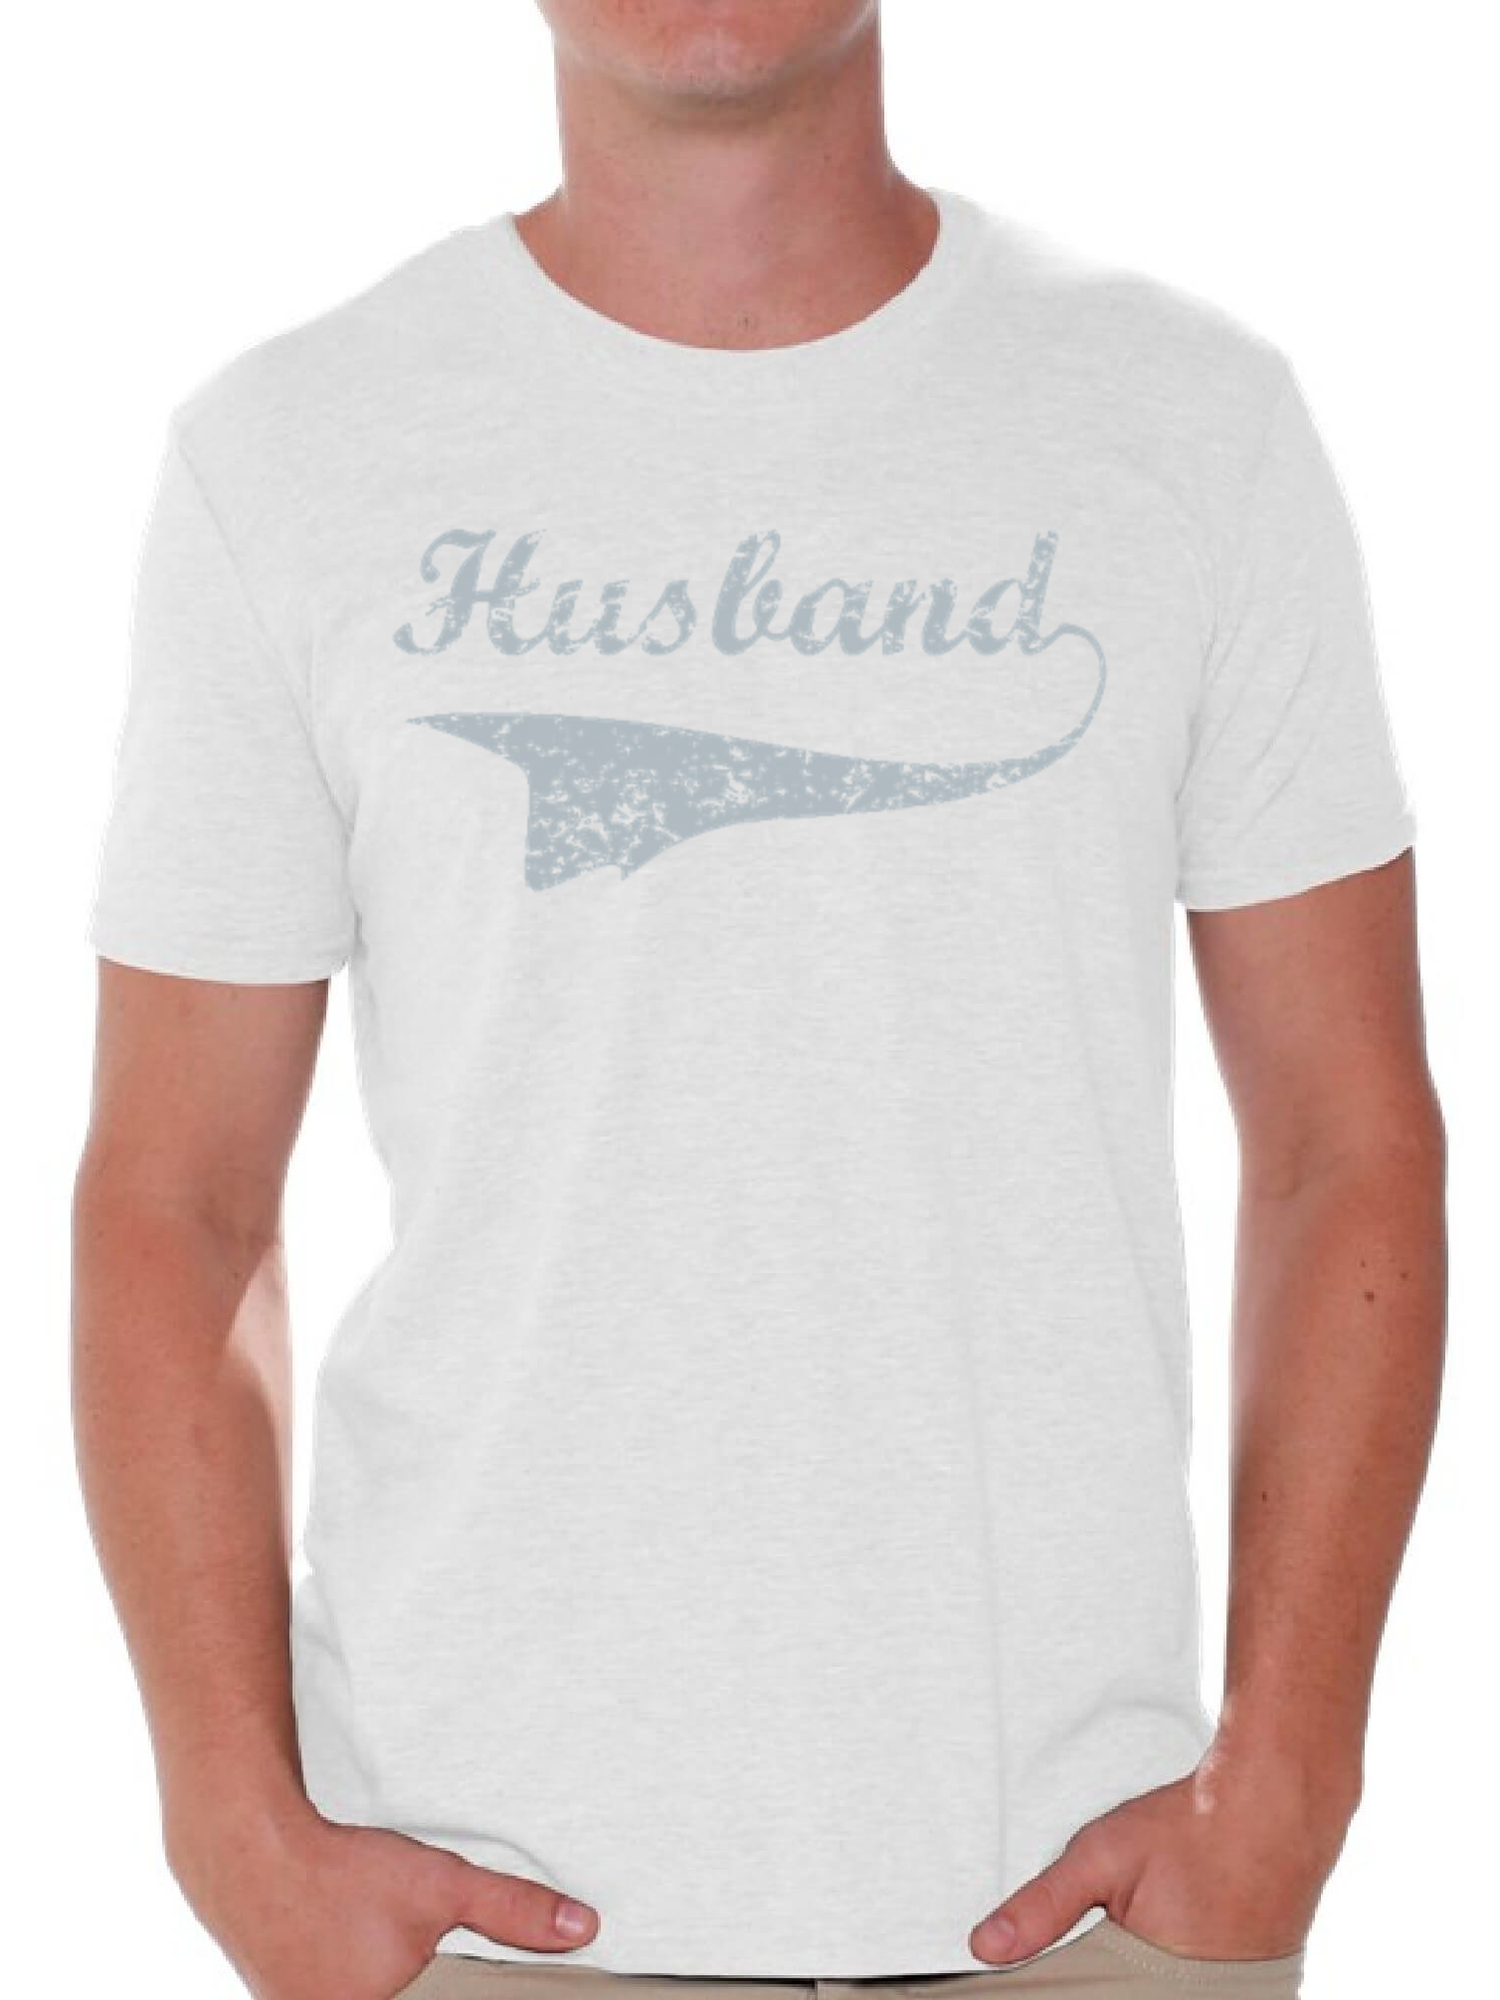 Awkward Styles Husband T Shirt for Men Husband Shirt for Him Husband Design Beloved Husband Gifts Cute T-Shirt for Men Funny Hubby T-Shirt Husband Clothing Collection Anniversary Gifts for Husband - image 1 of 4